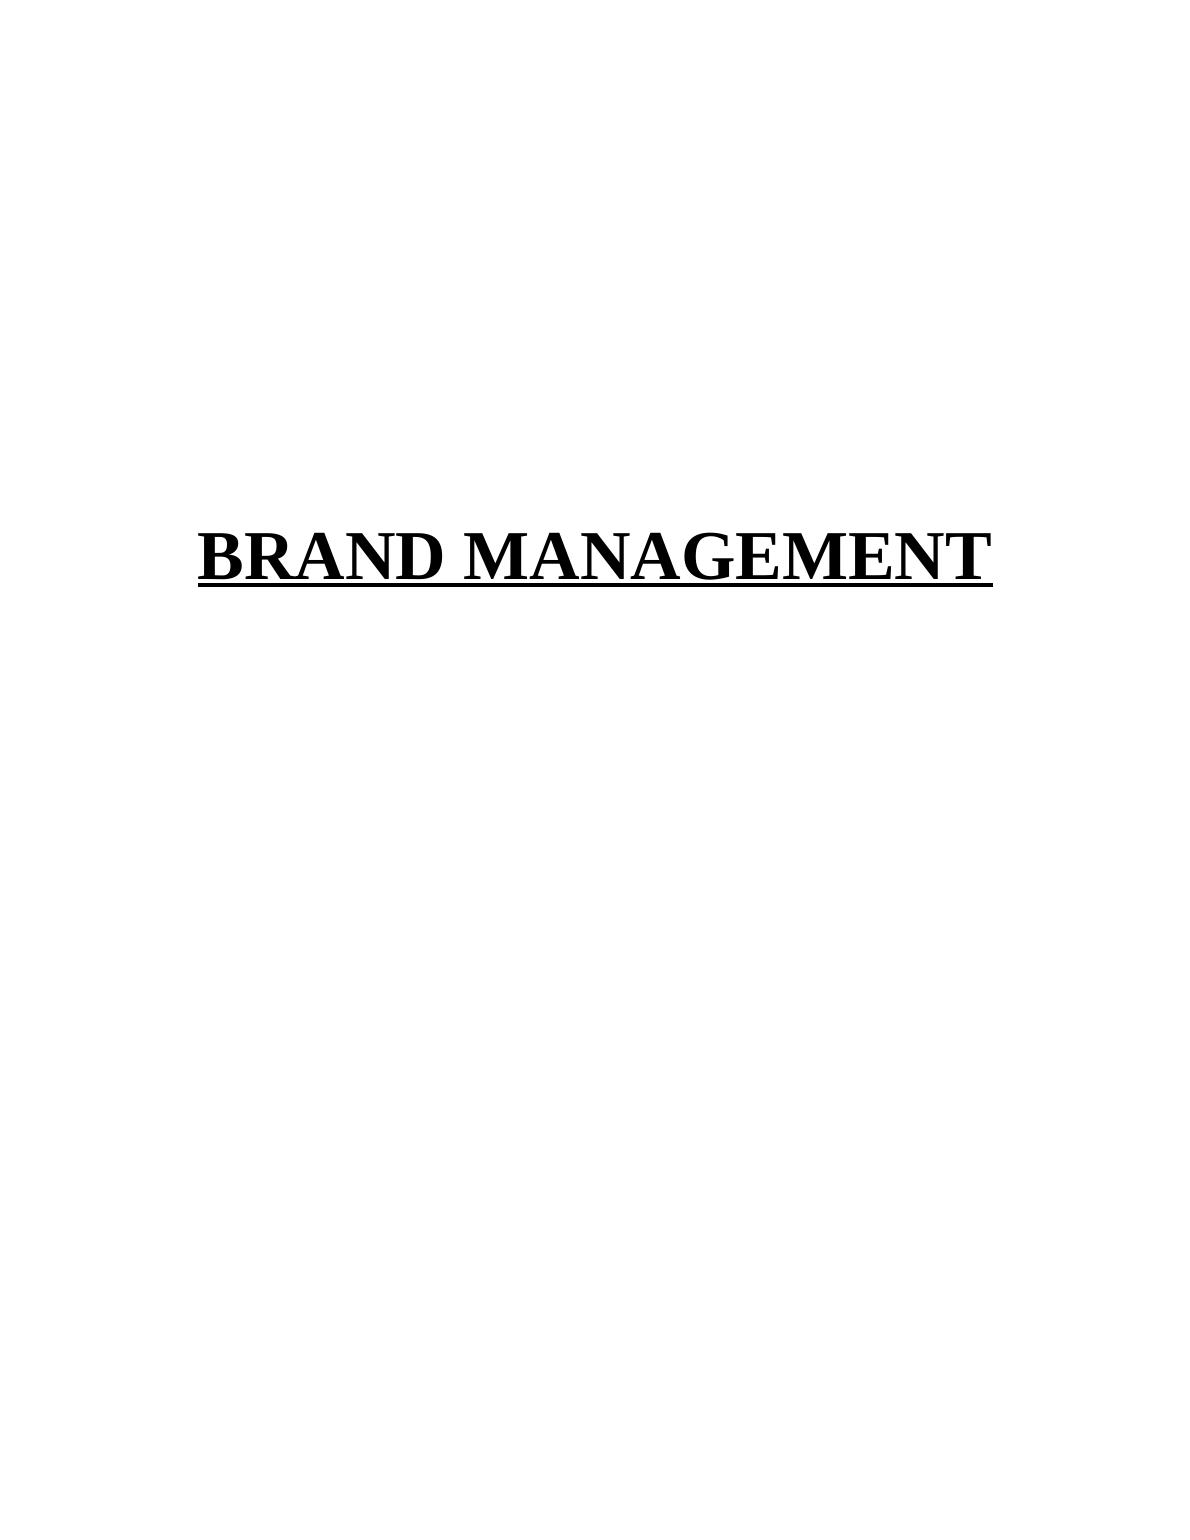 Strategies of Brand Management for Dyson Group Plc_1